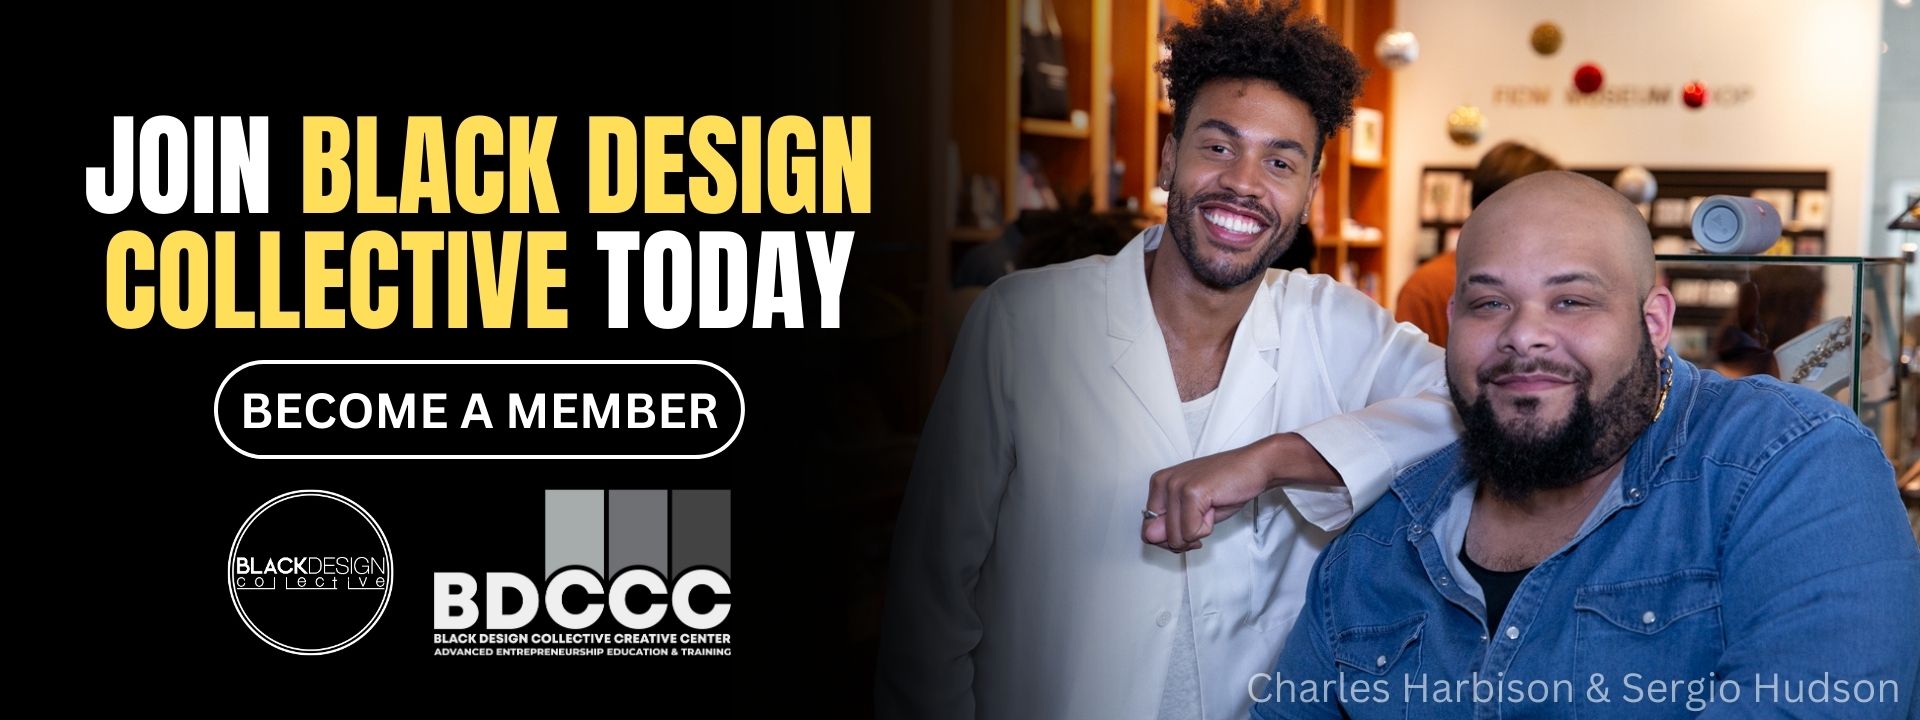 Join Black Design Collective Today